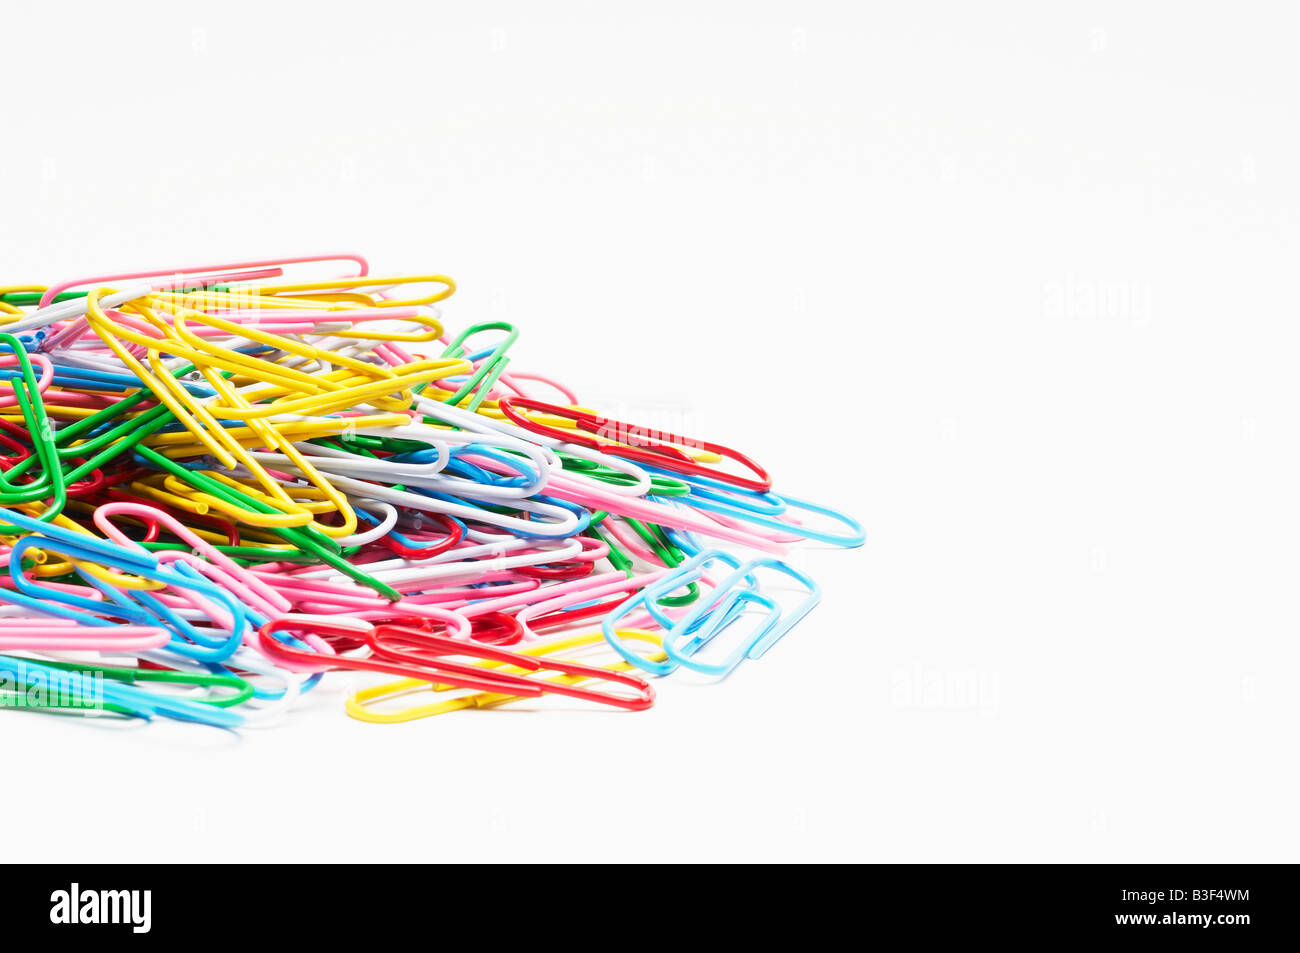 Heap of multi colored paper clips Stock Photo